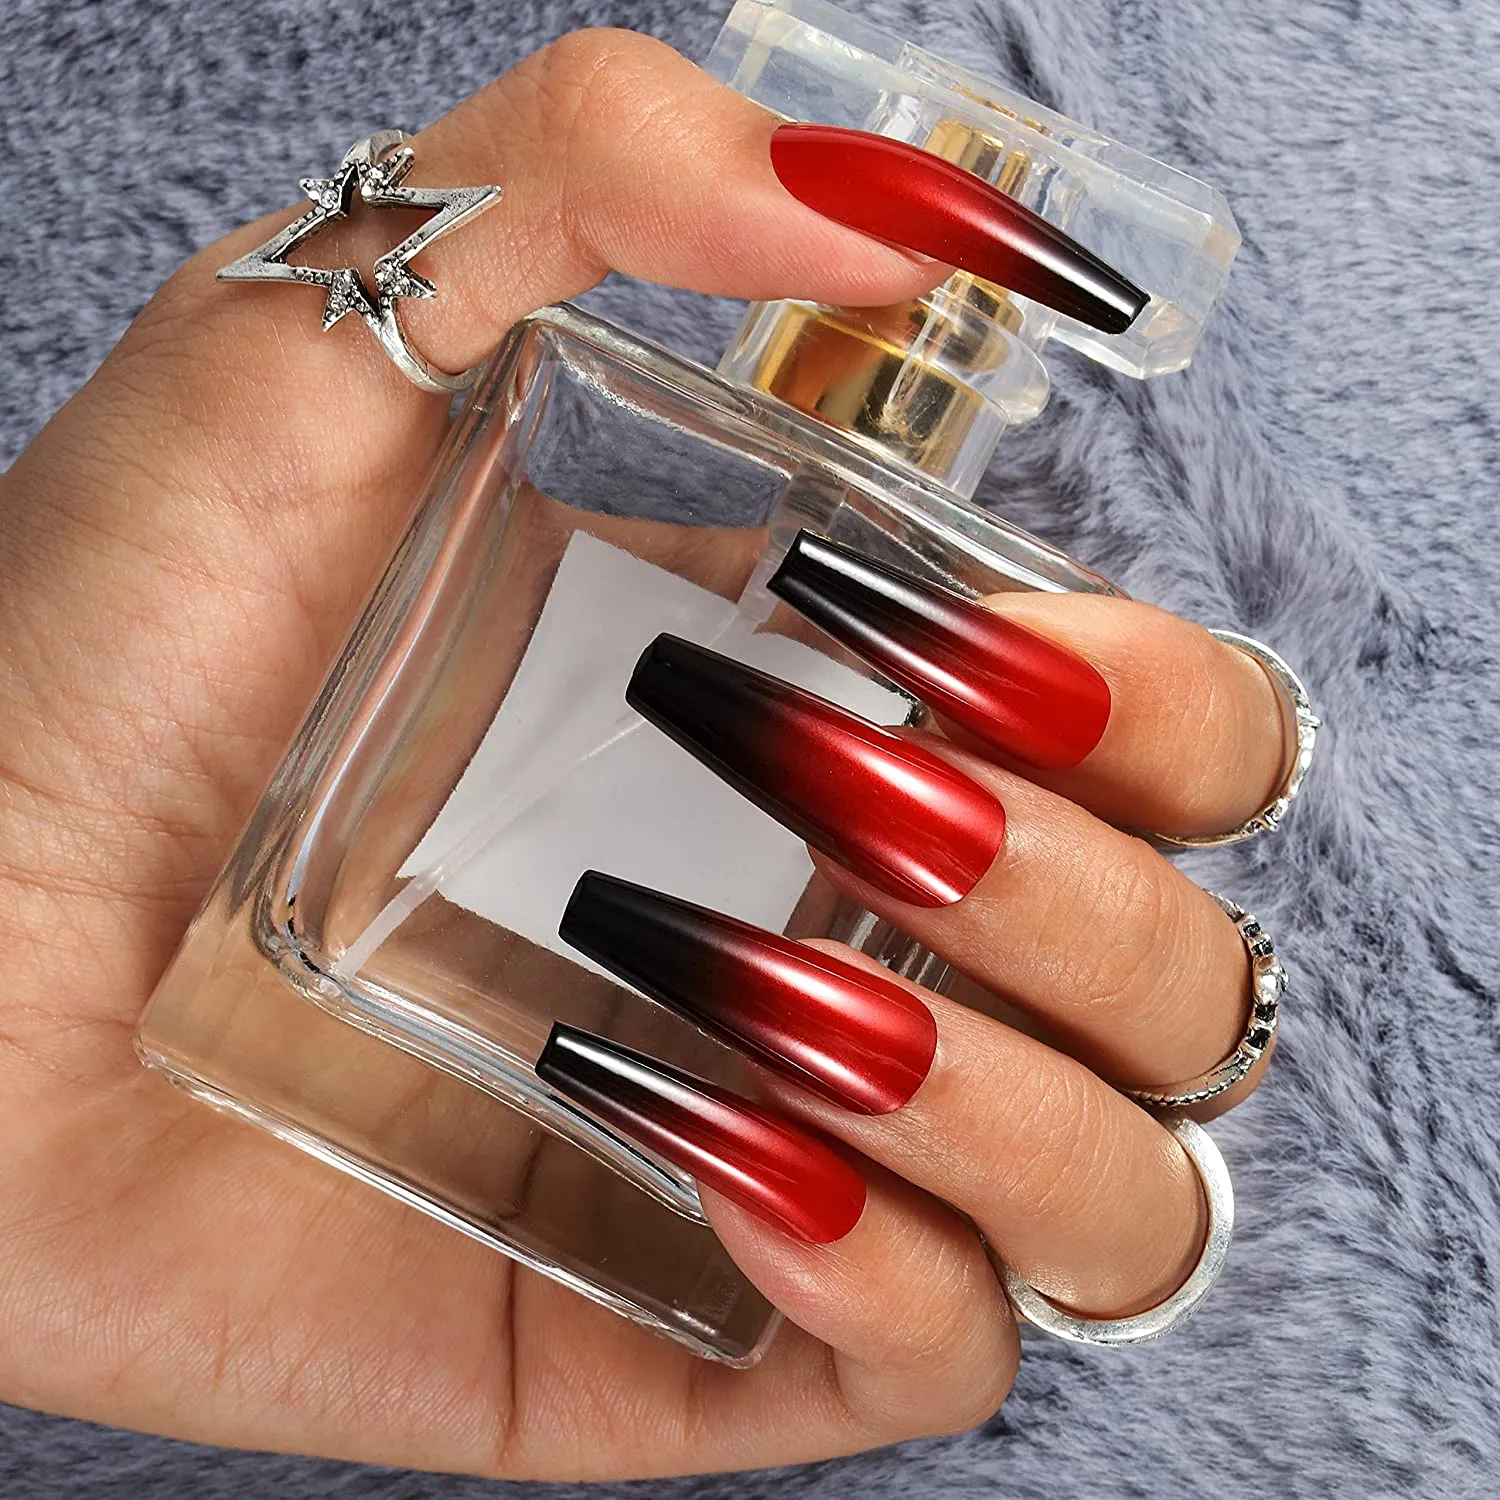 Red Ombre Nails Acrylics | TikTok